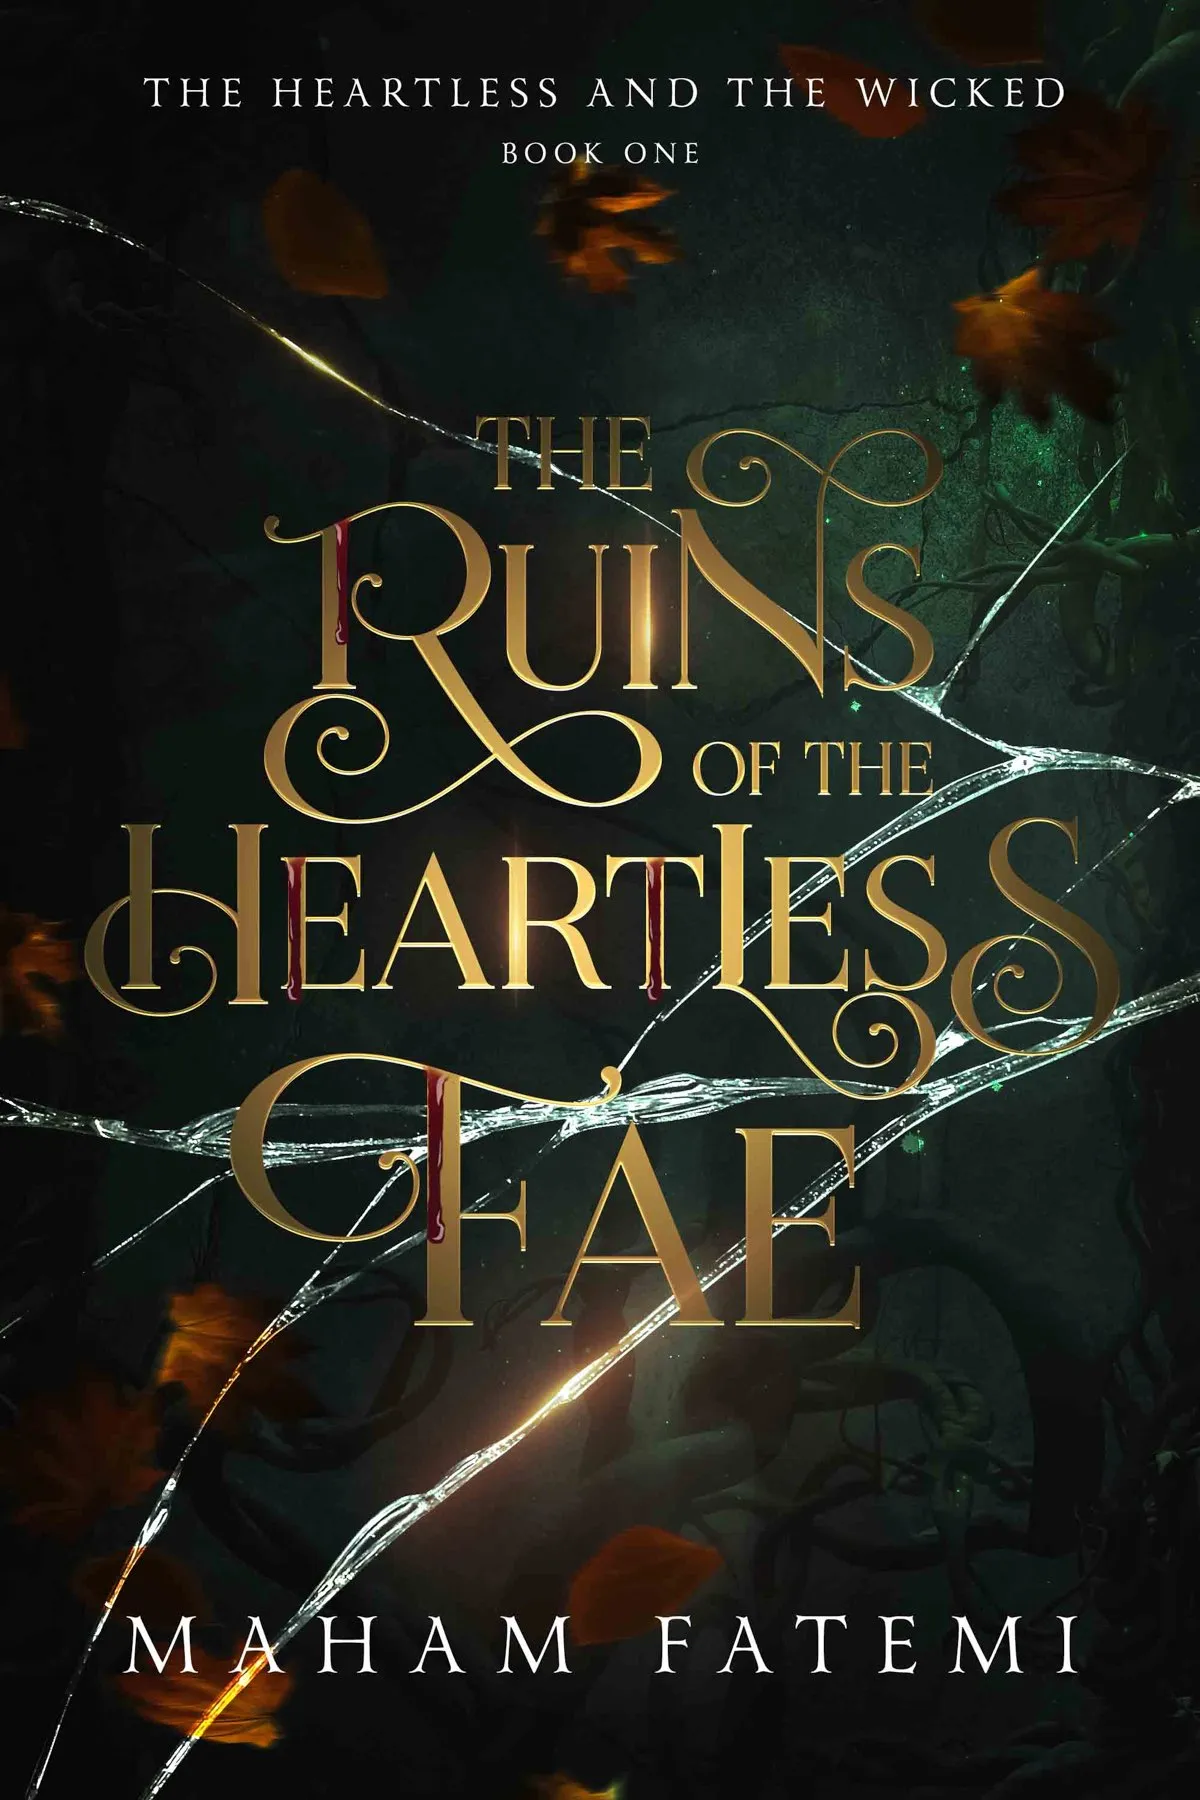 The Ruins of the Heartless Fae (The Heartless and the Wicked #1)